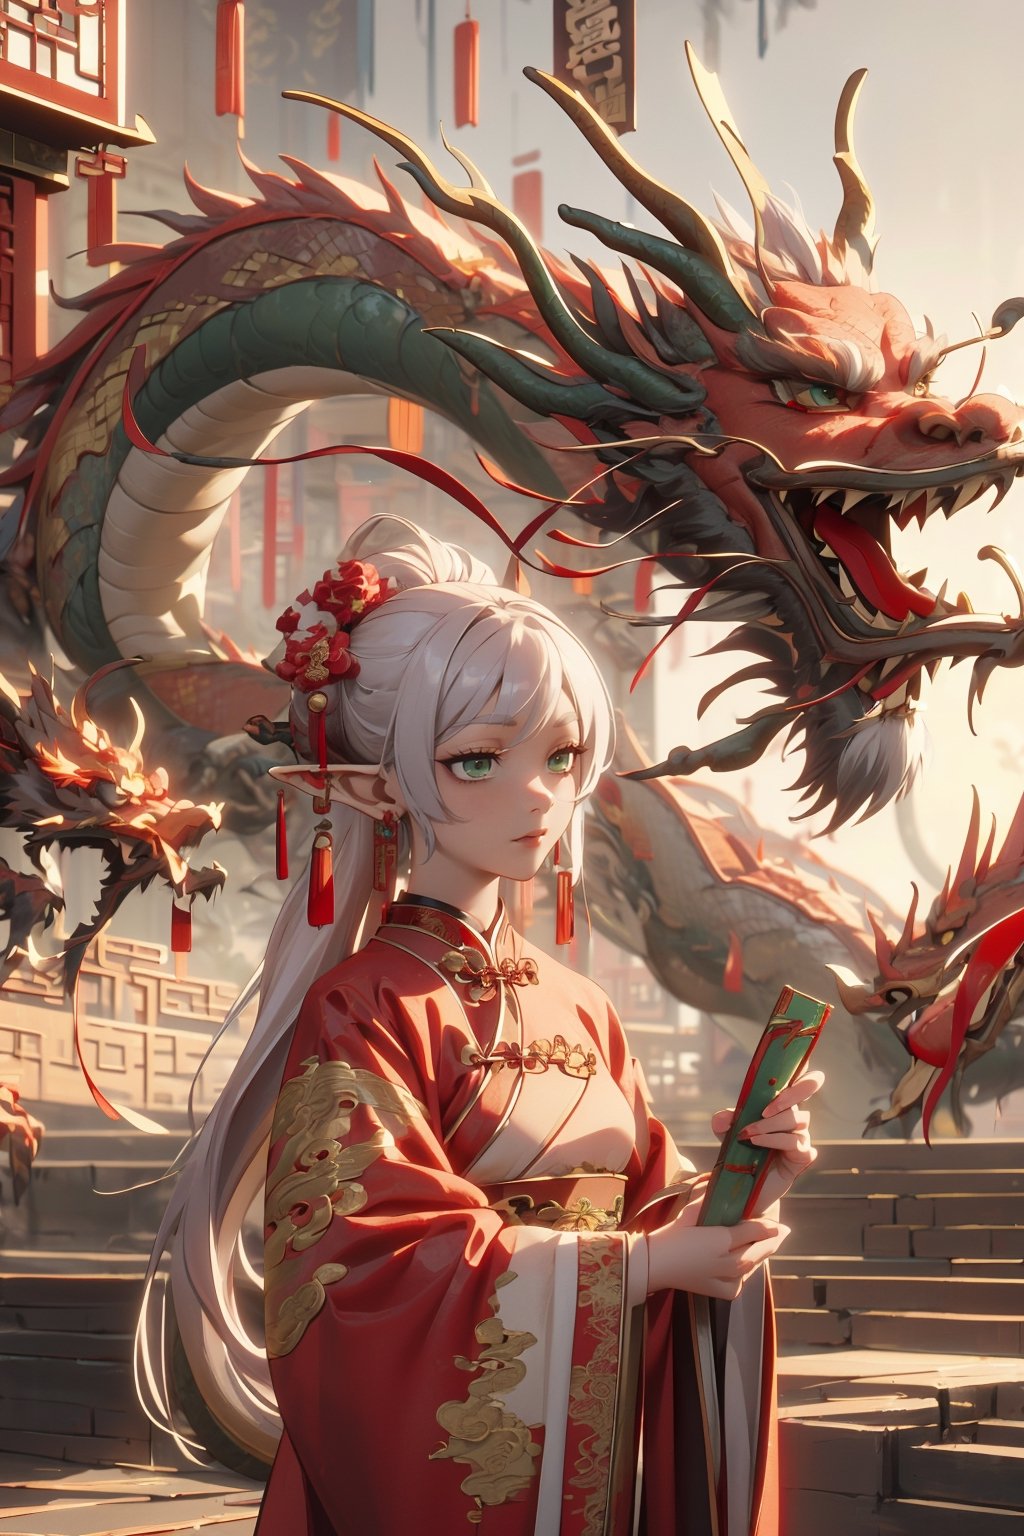 1woman, mature, grey_hair, loose hair, elf, pointy_ears, long_hair, green_eyes, small_breasts, earrings, red_earrings, 
red dress, chinese dress, dragon, china town, celebration, chinese new year, taut-dress,
 dragon in the background,
upper body, (chinese-dragon:1.5)
(establishing-shot:1.5)